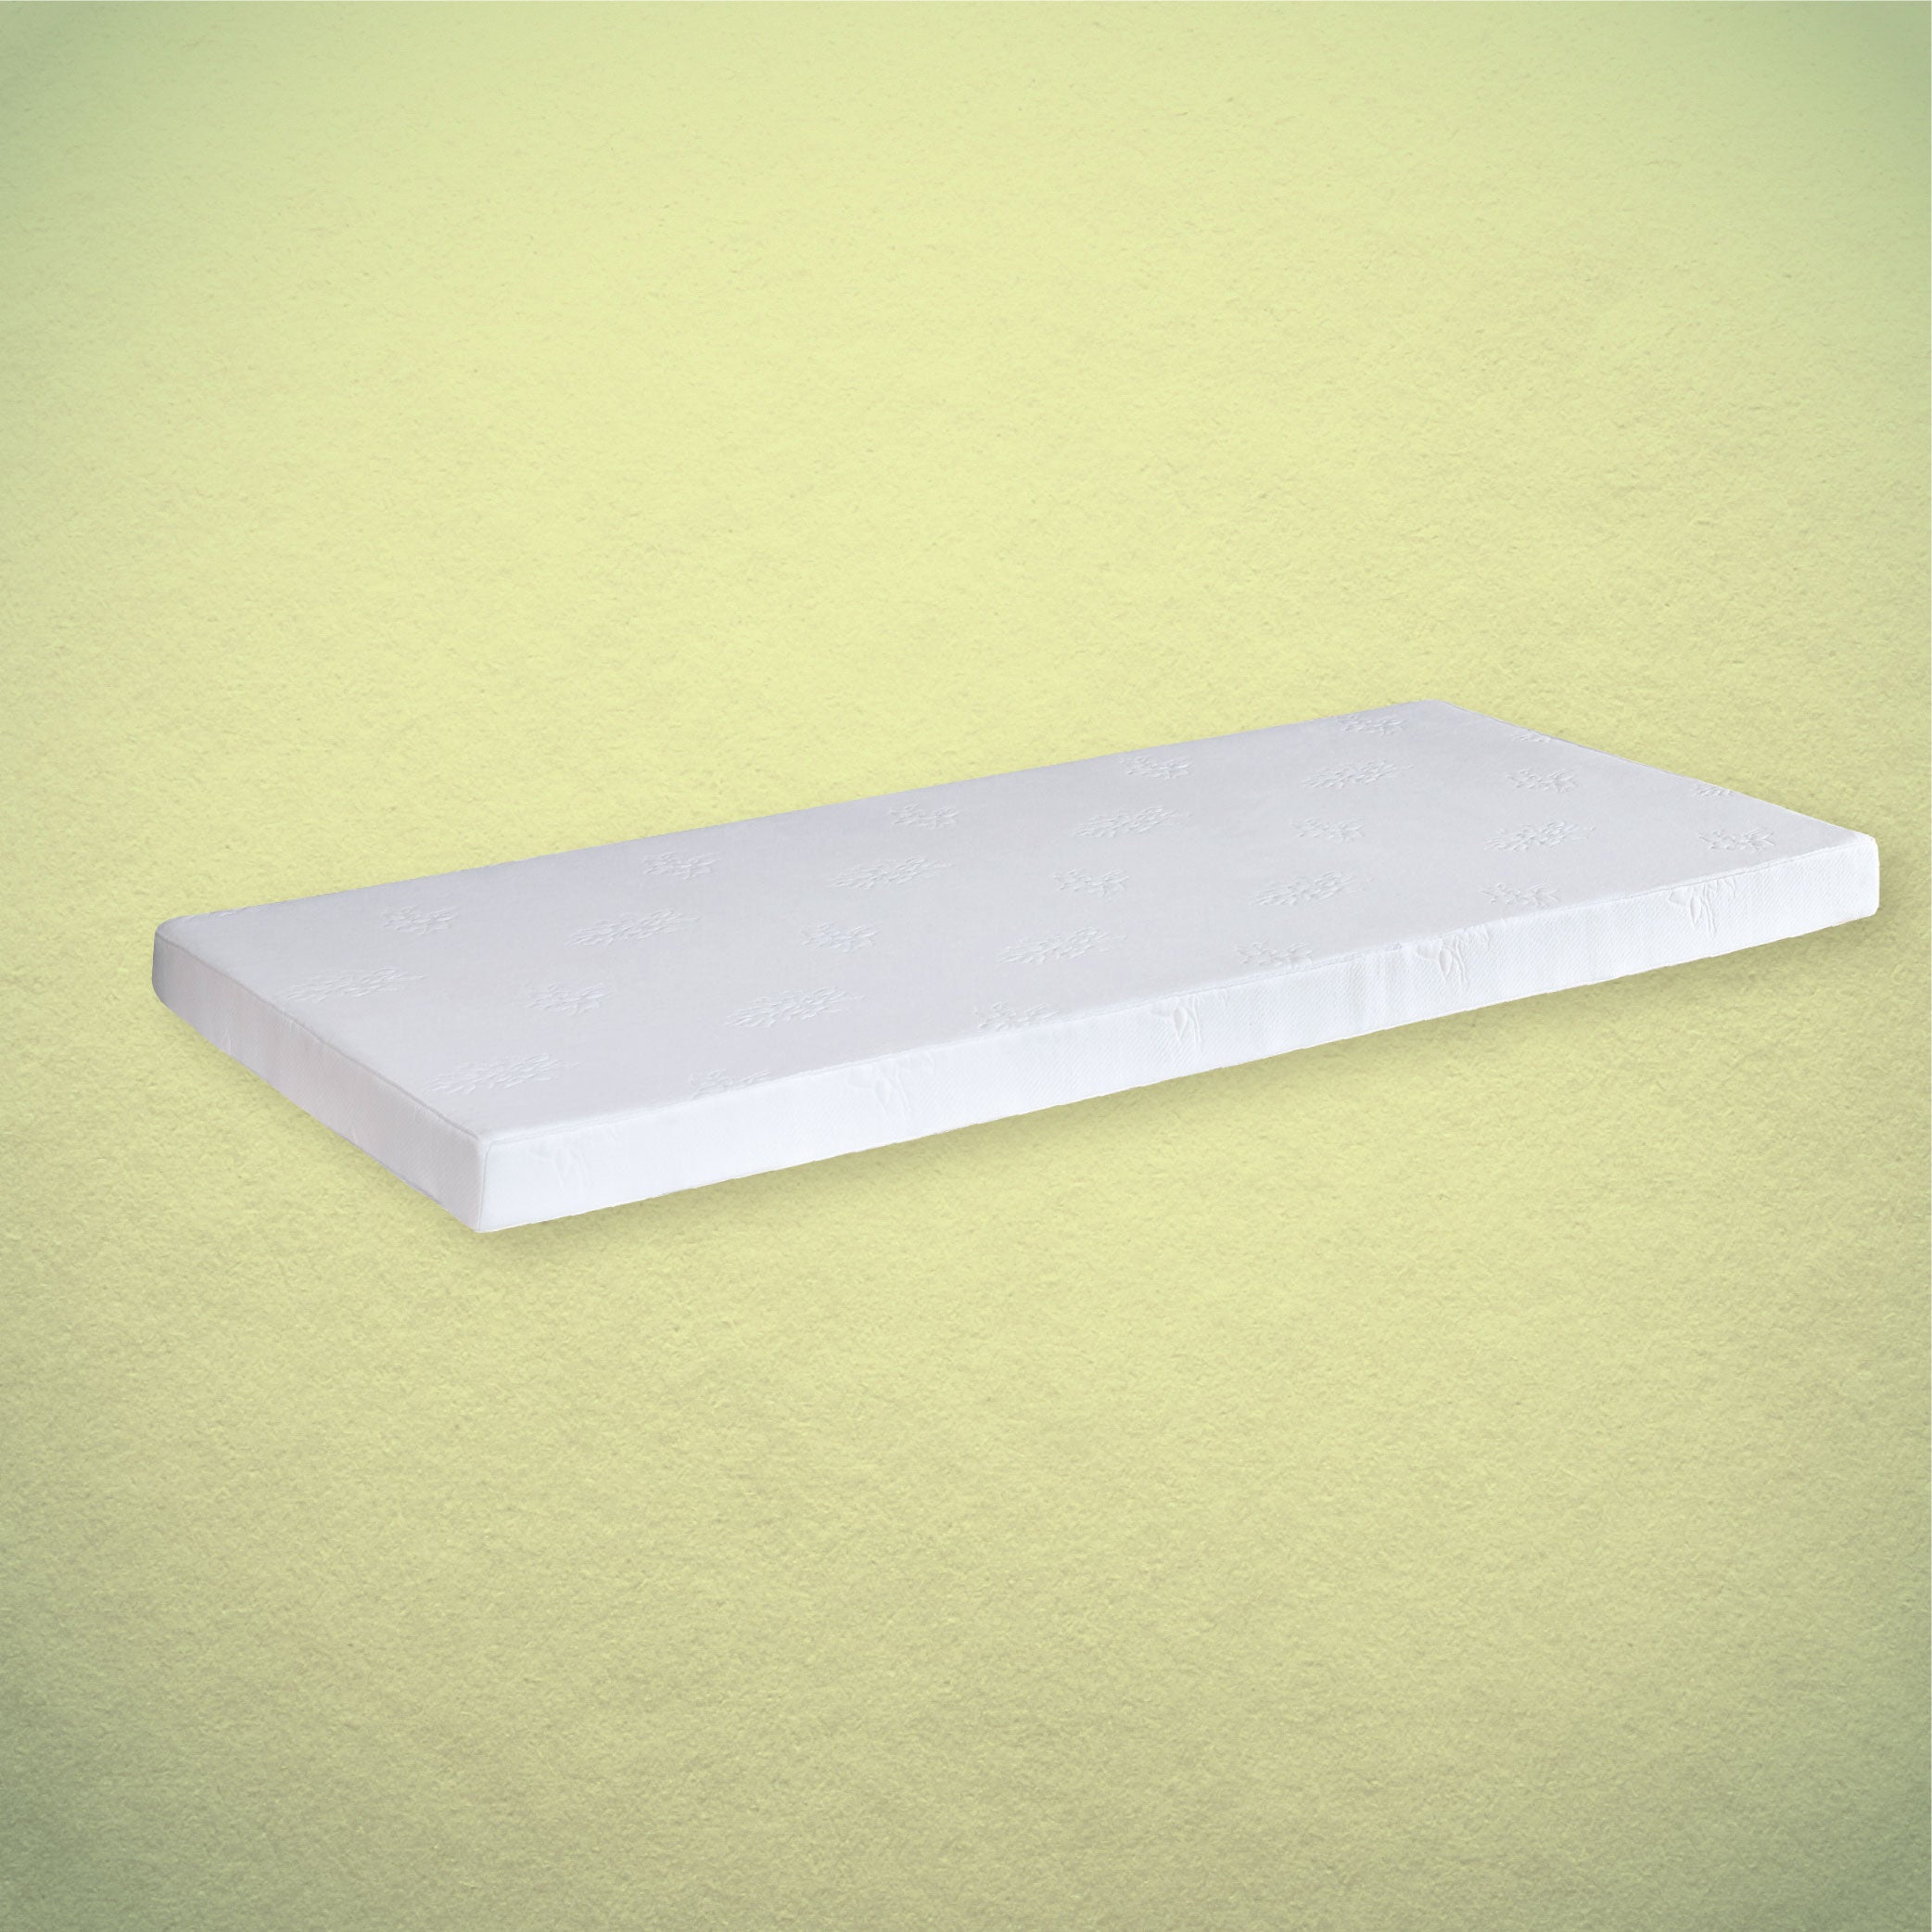 S-3 Comfort Mattress - Tailor-made Size (48"W or below)
